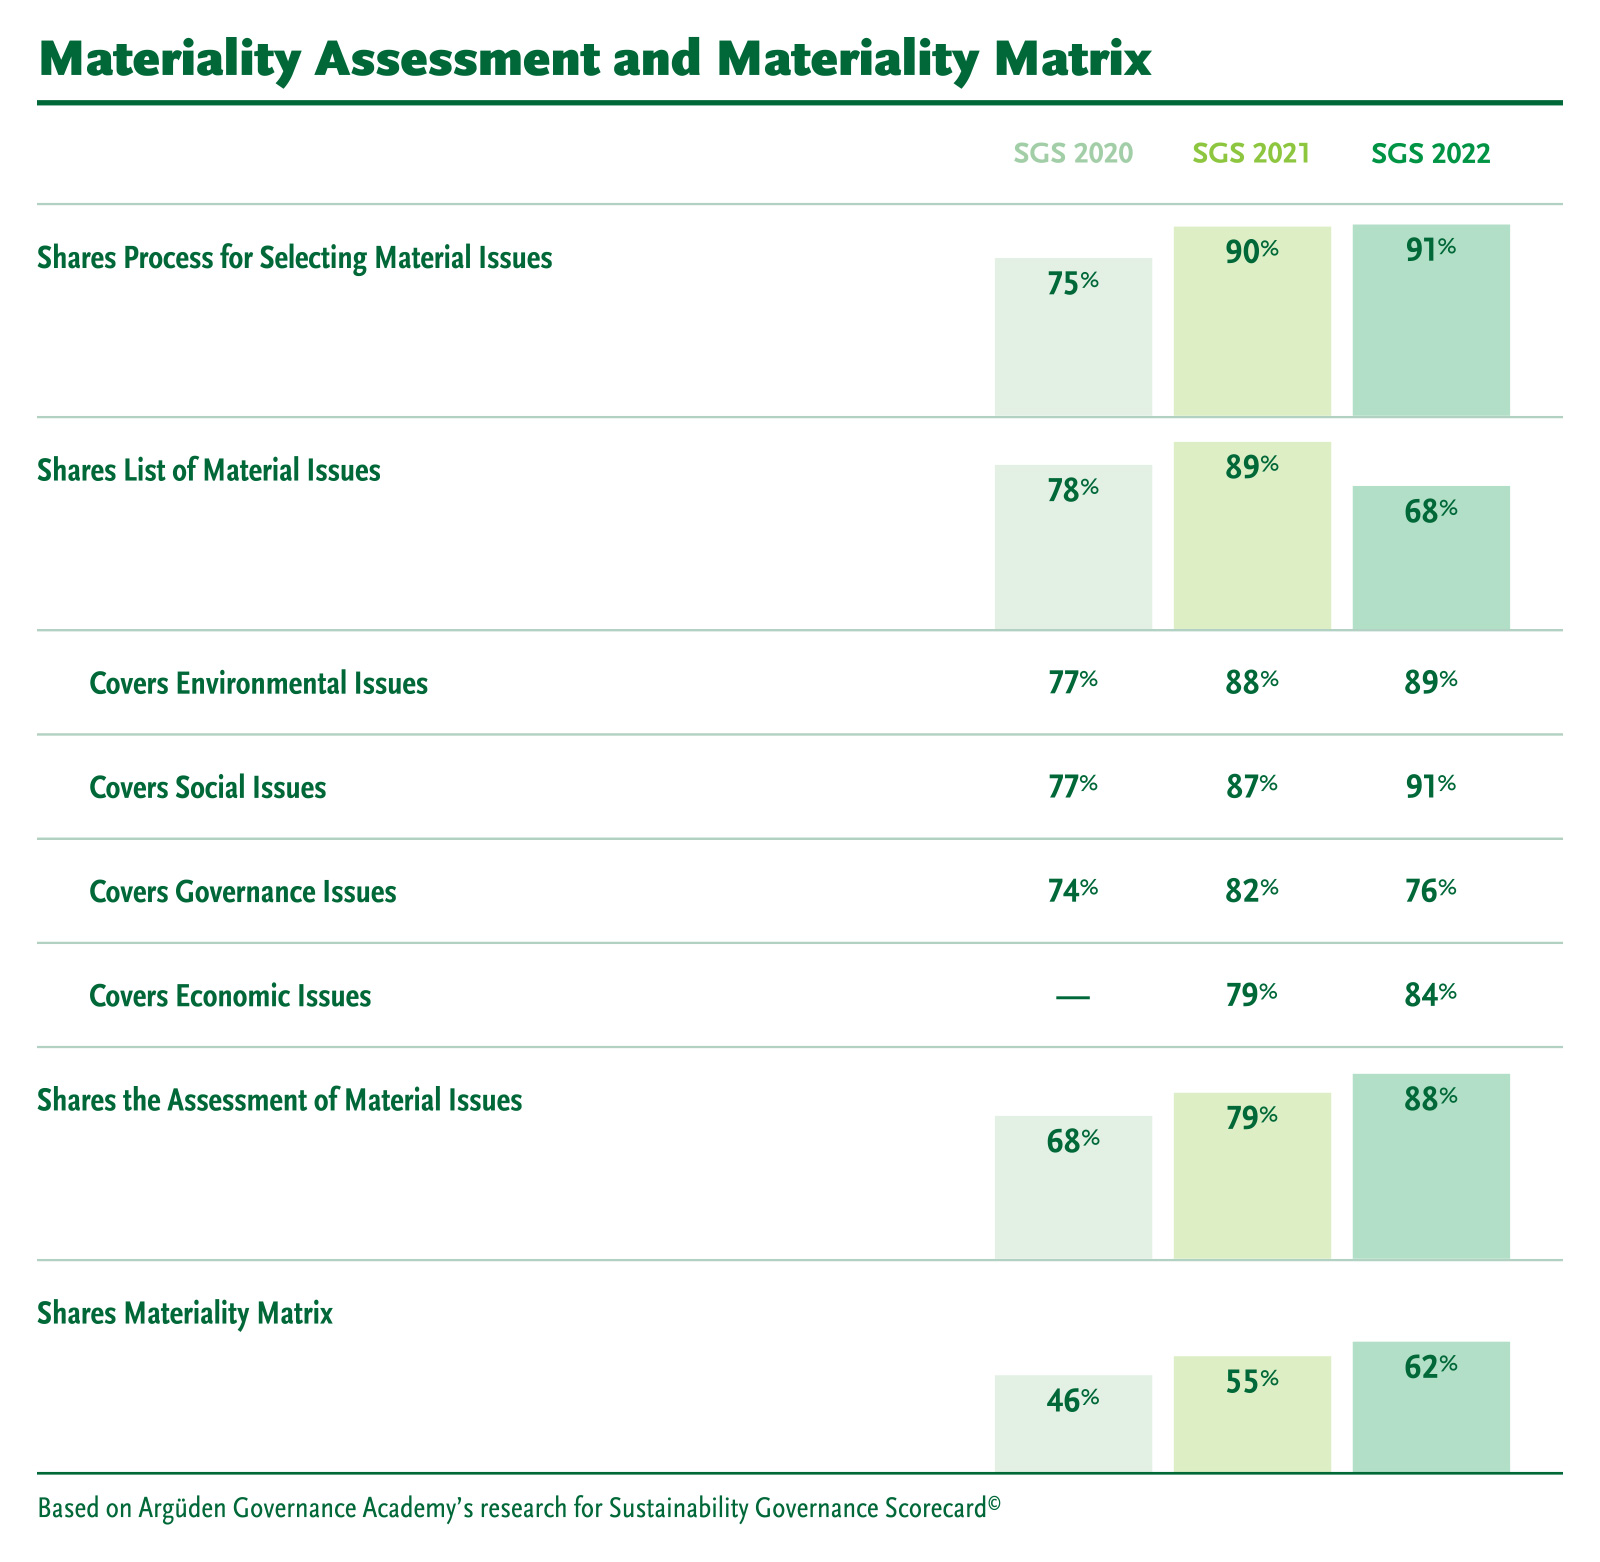 SGS 2022 Materiality Assessment and Materiality Matrix